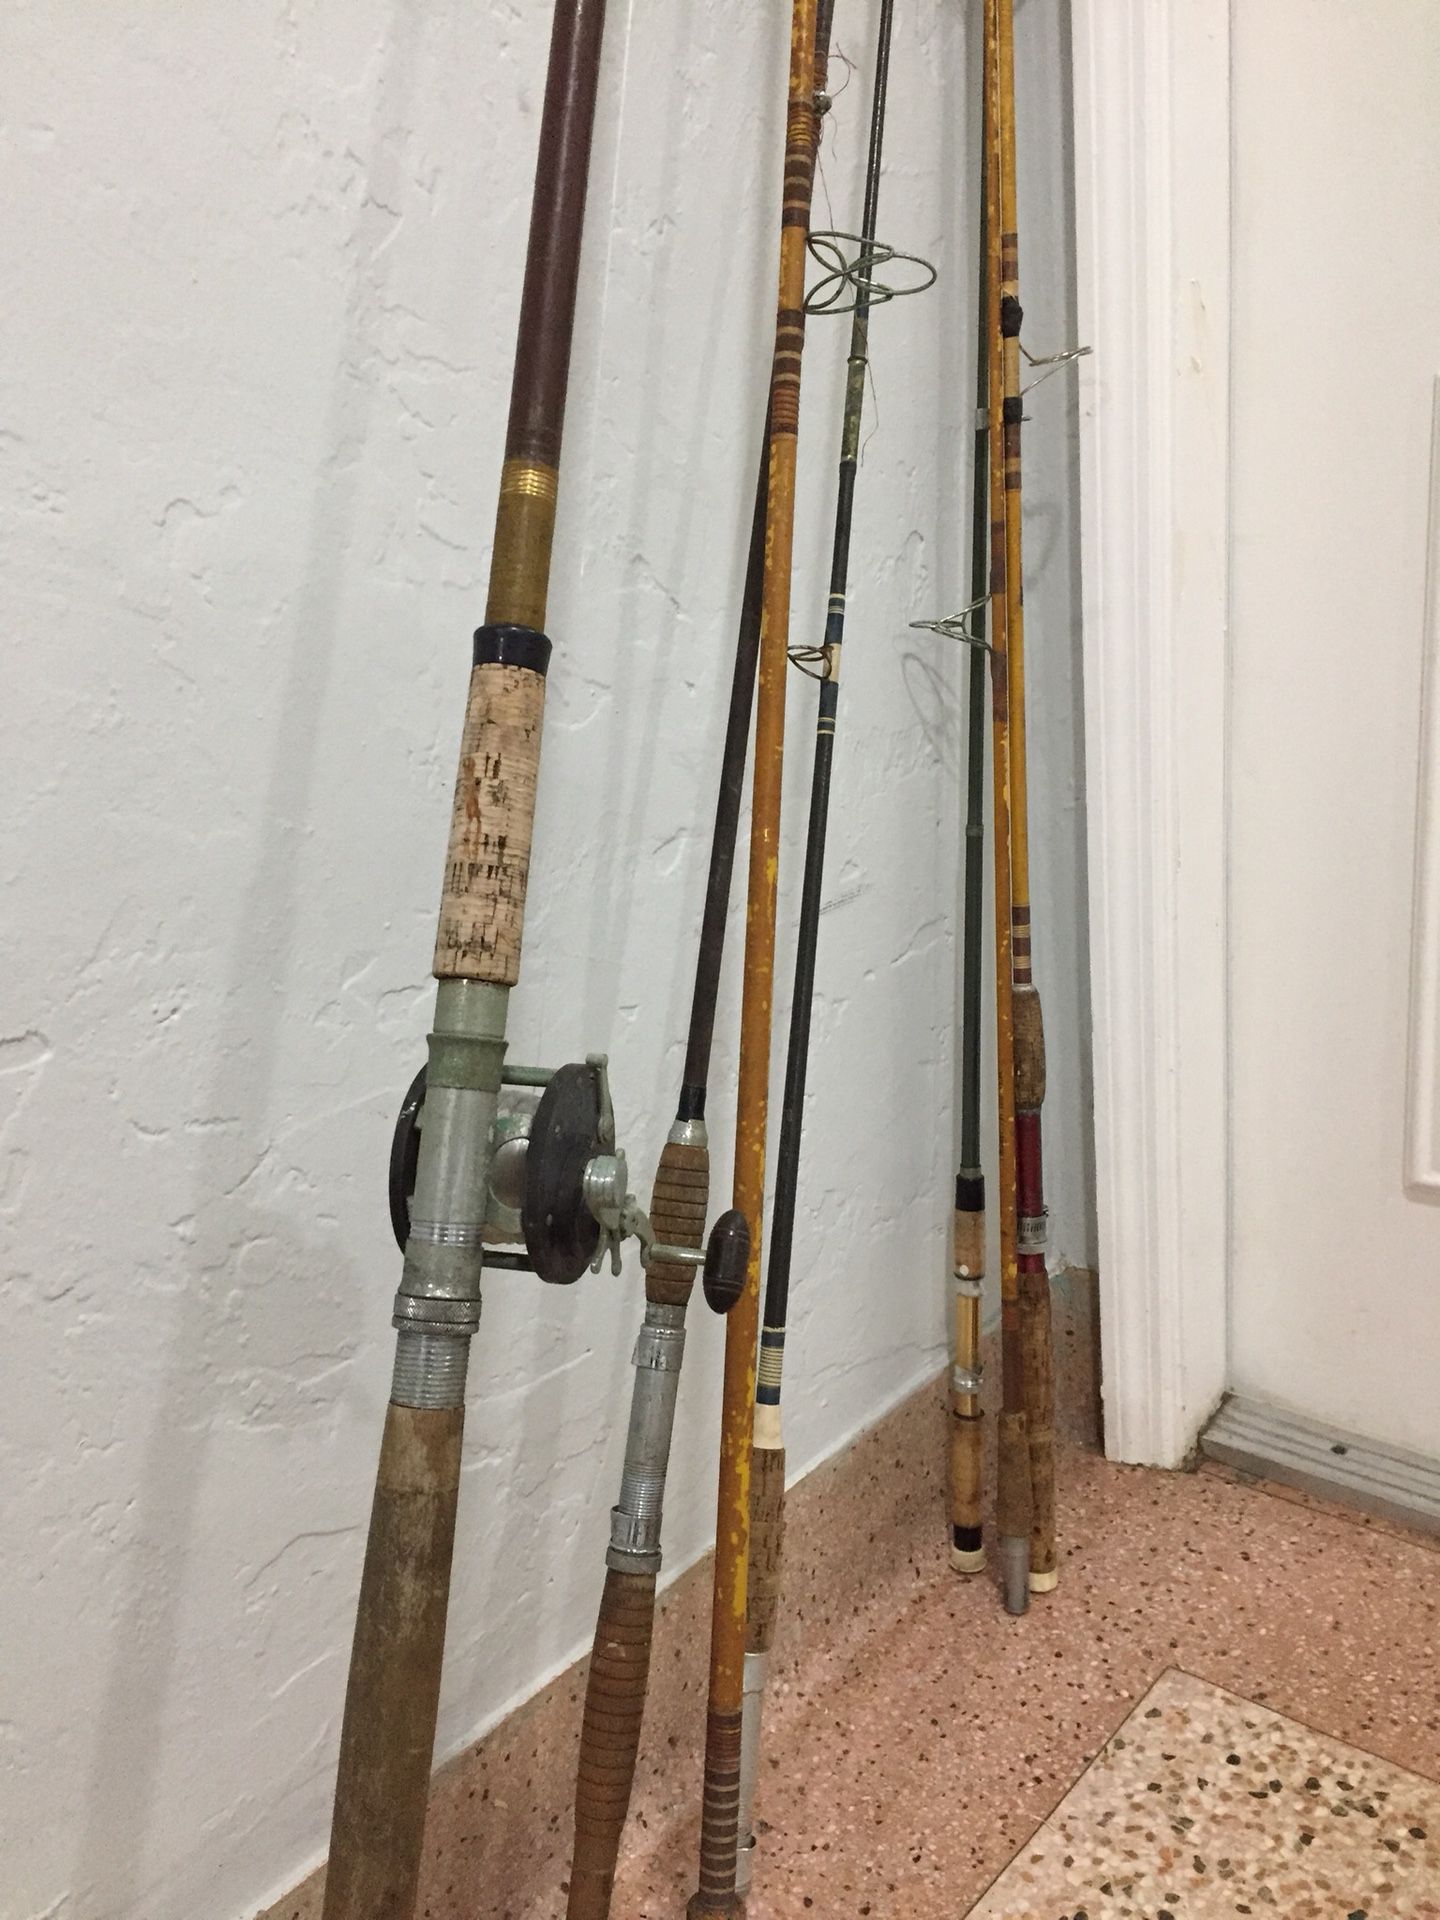 8 Fishing Canes and 1 Reel